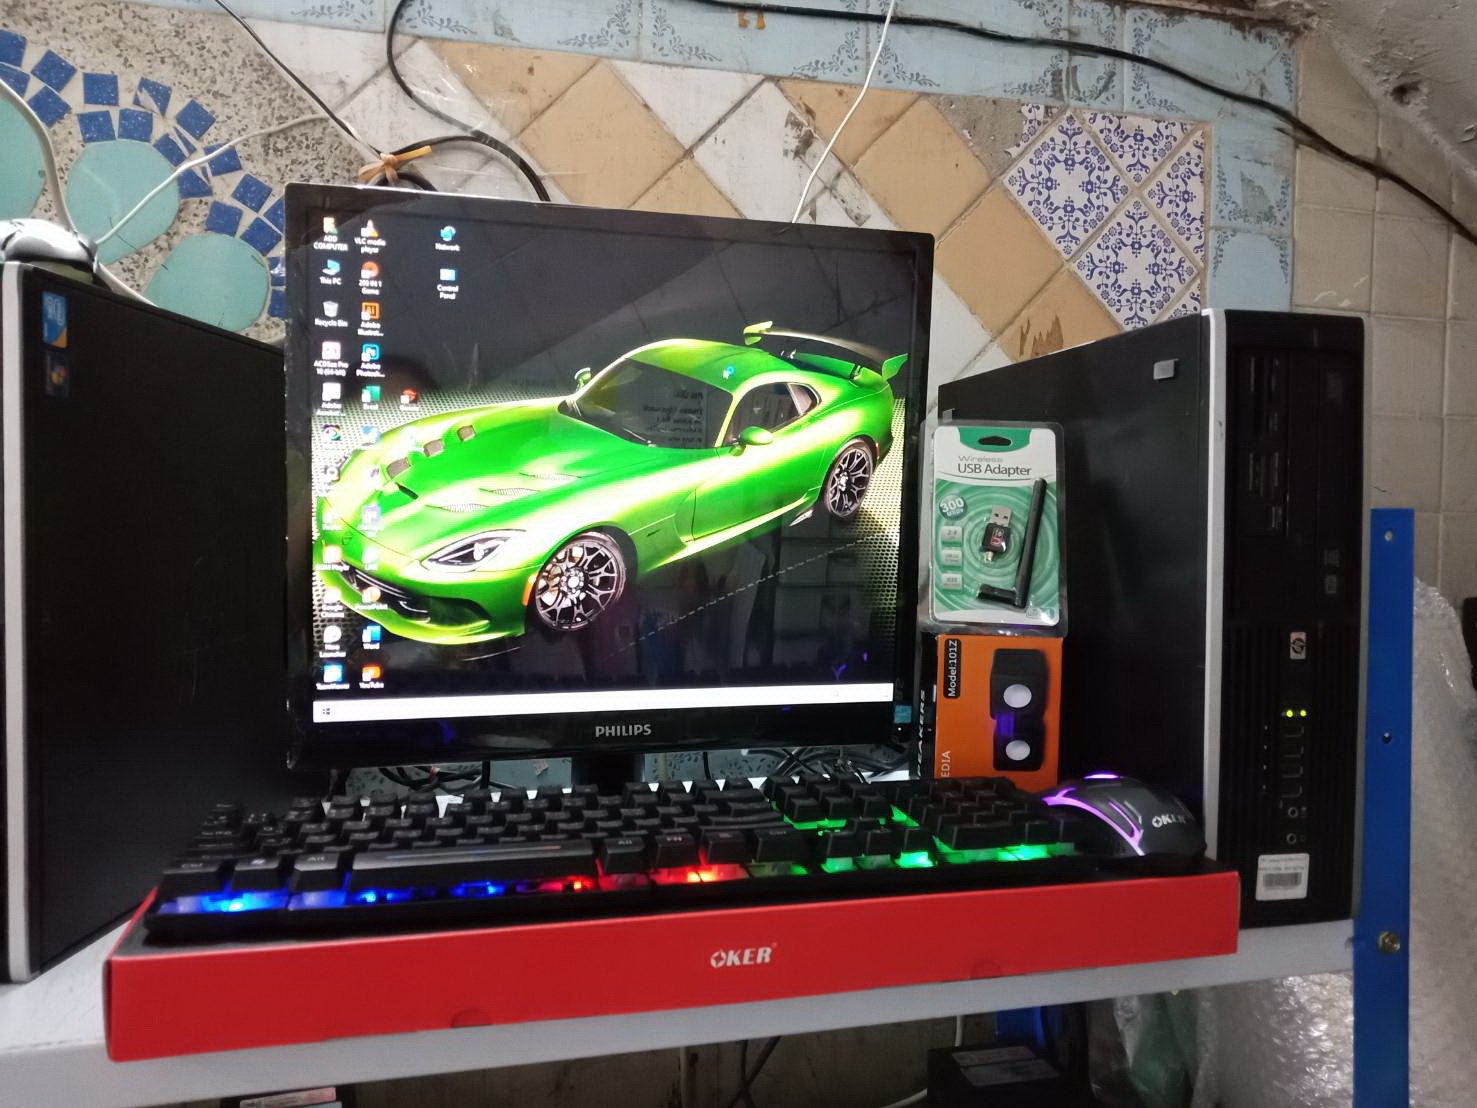 PCครบชุด  HP Core i5 จอ19